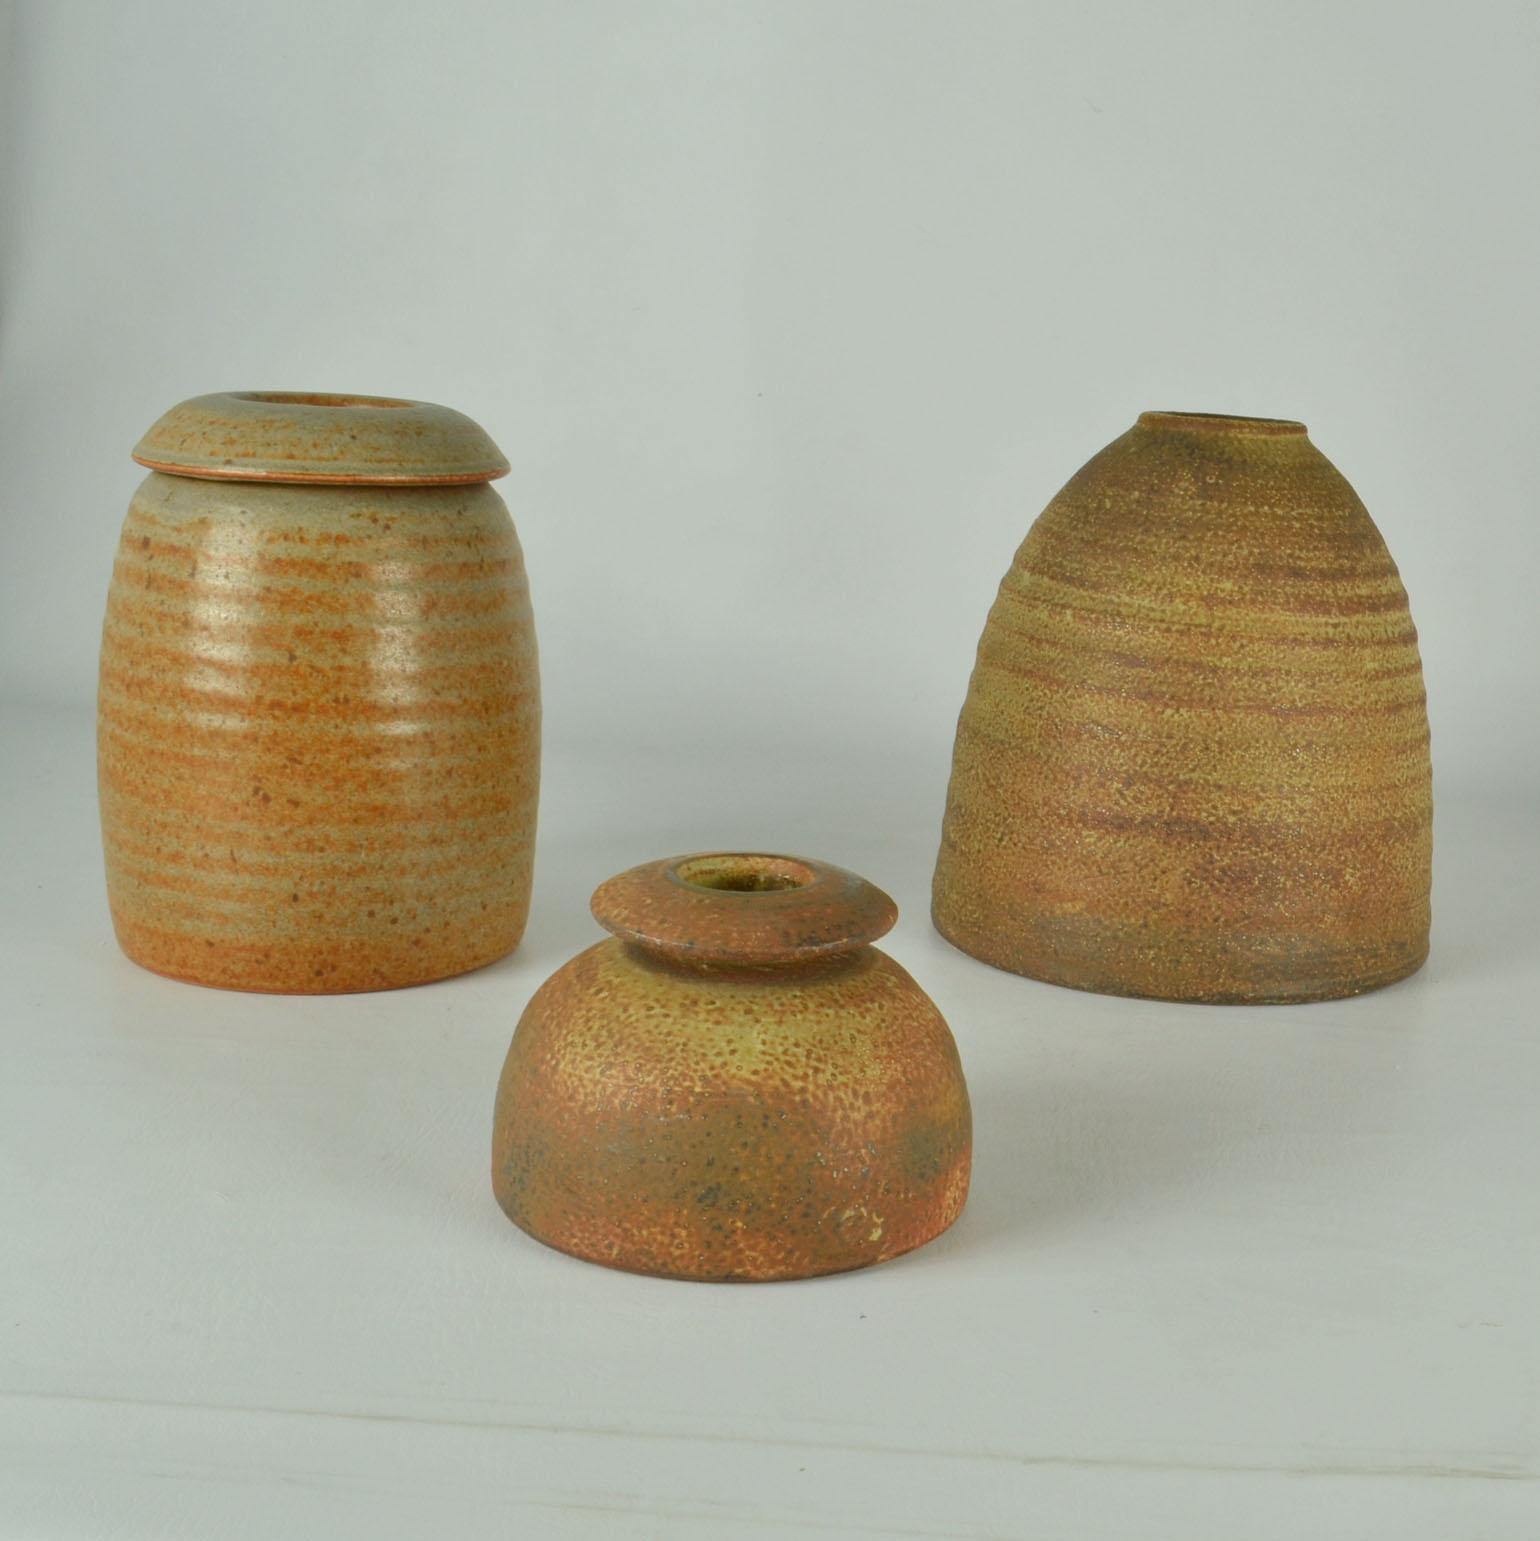 Sculptural beehive shape studio pottery vases group is created on the turning wheel by highly technical skilled Dutch ceramist Piet Knepper for Mobach in the 1960's. The glaze in tones of ocher, and rust browns are created by natural resources and